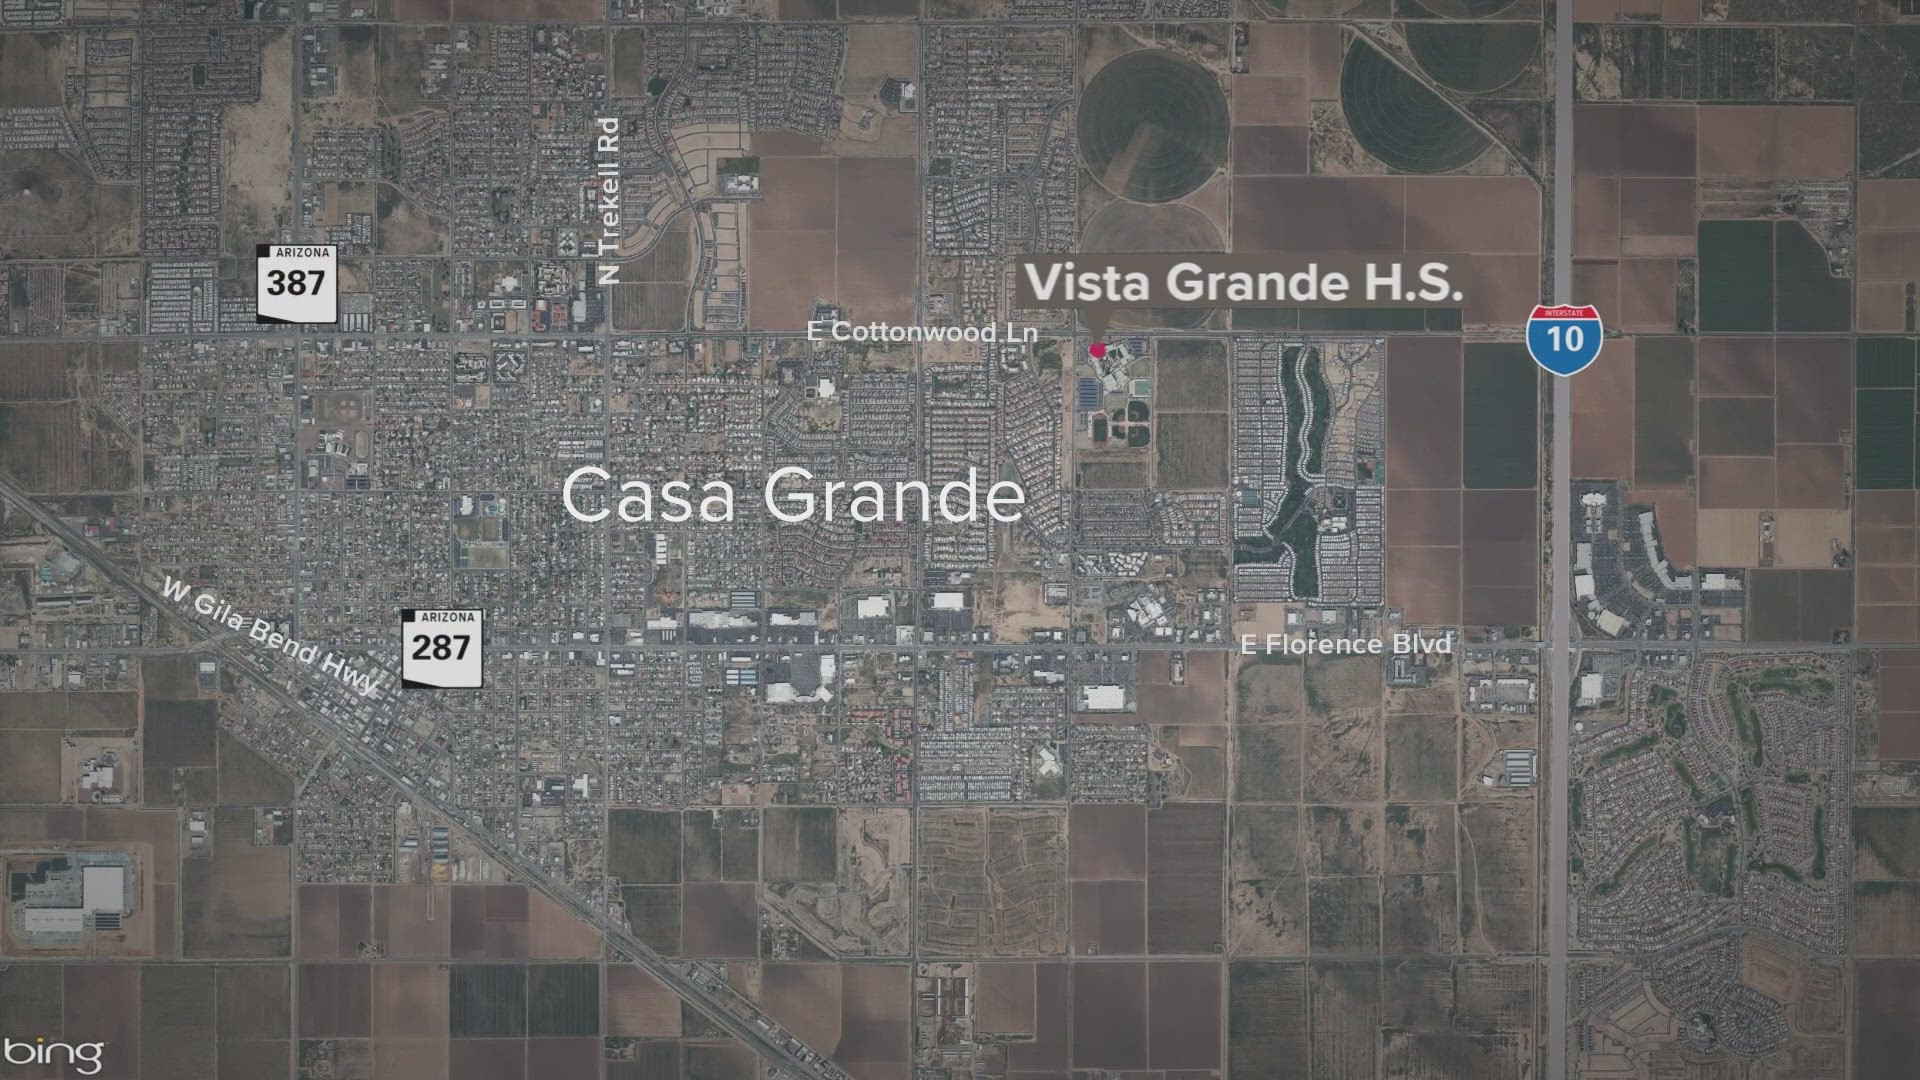 The student was arrested Monday morning at Vista Grande High School, police said.